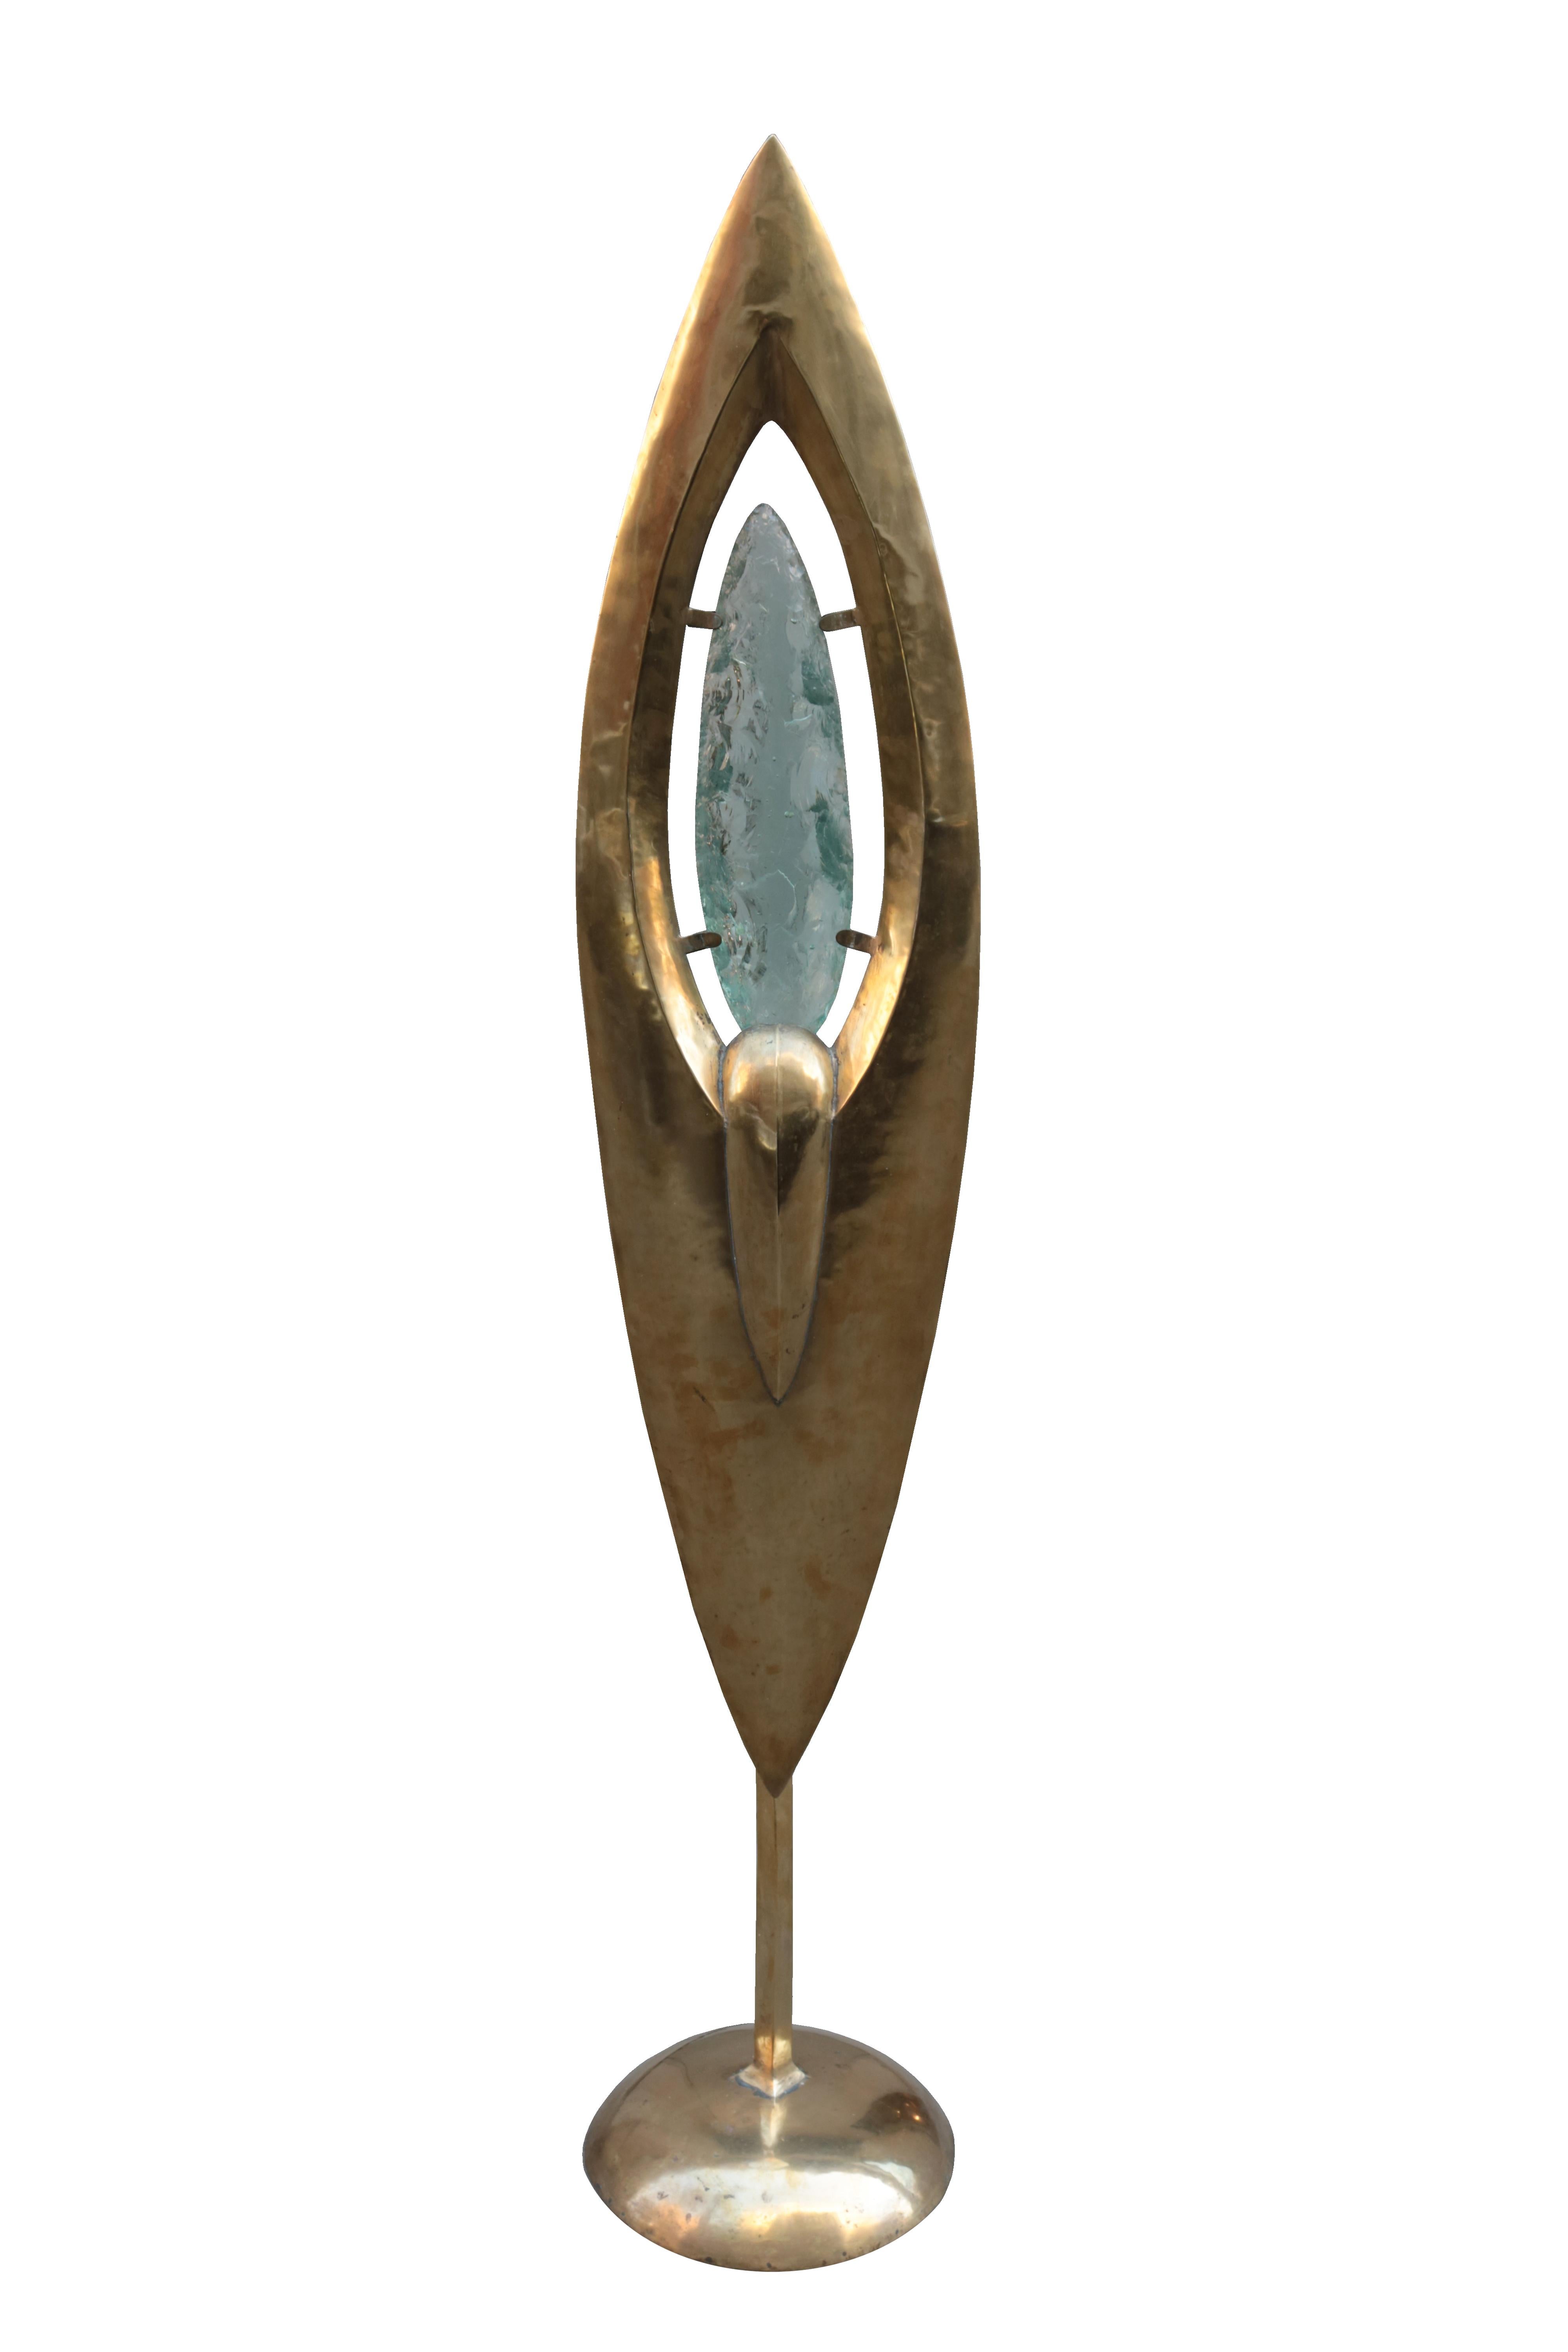 Unusual sculptural Modernist floor lamp. 
Patinated brass with an illuminated piece of rough cut glass 
mounted in the center. Glass has blue hue when illuminated.